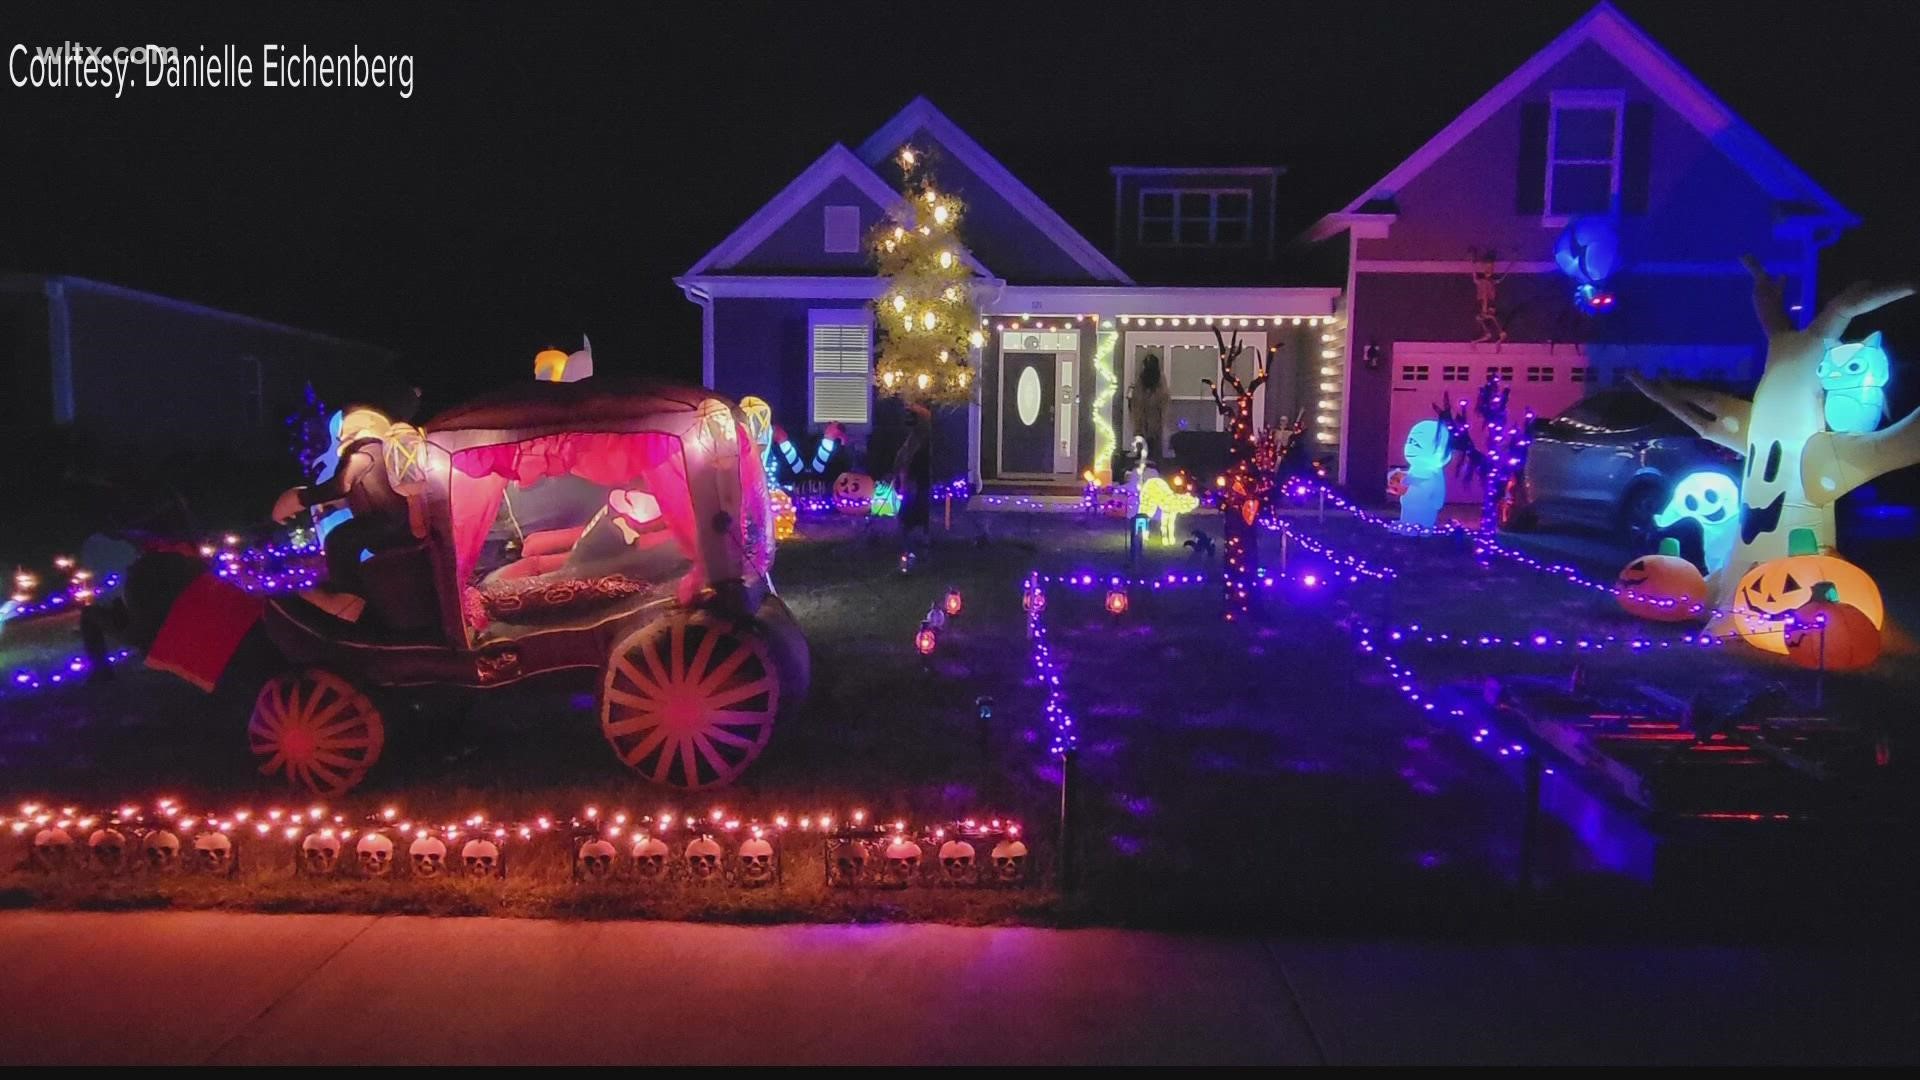 One family in Camden is going all out to decorate their house for Halloween.